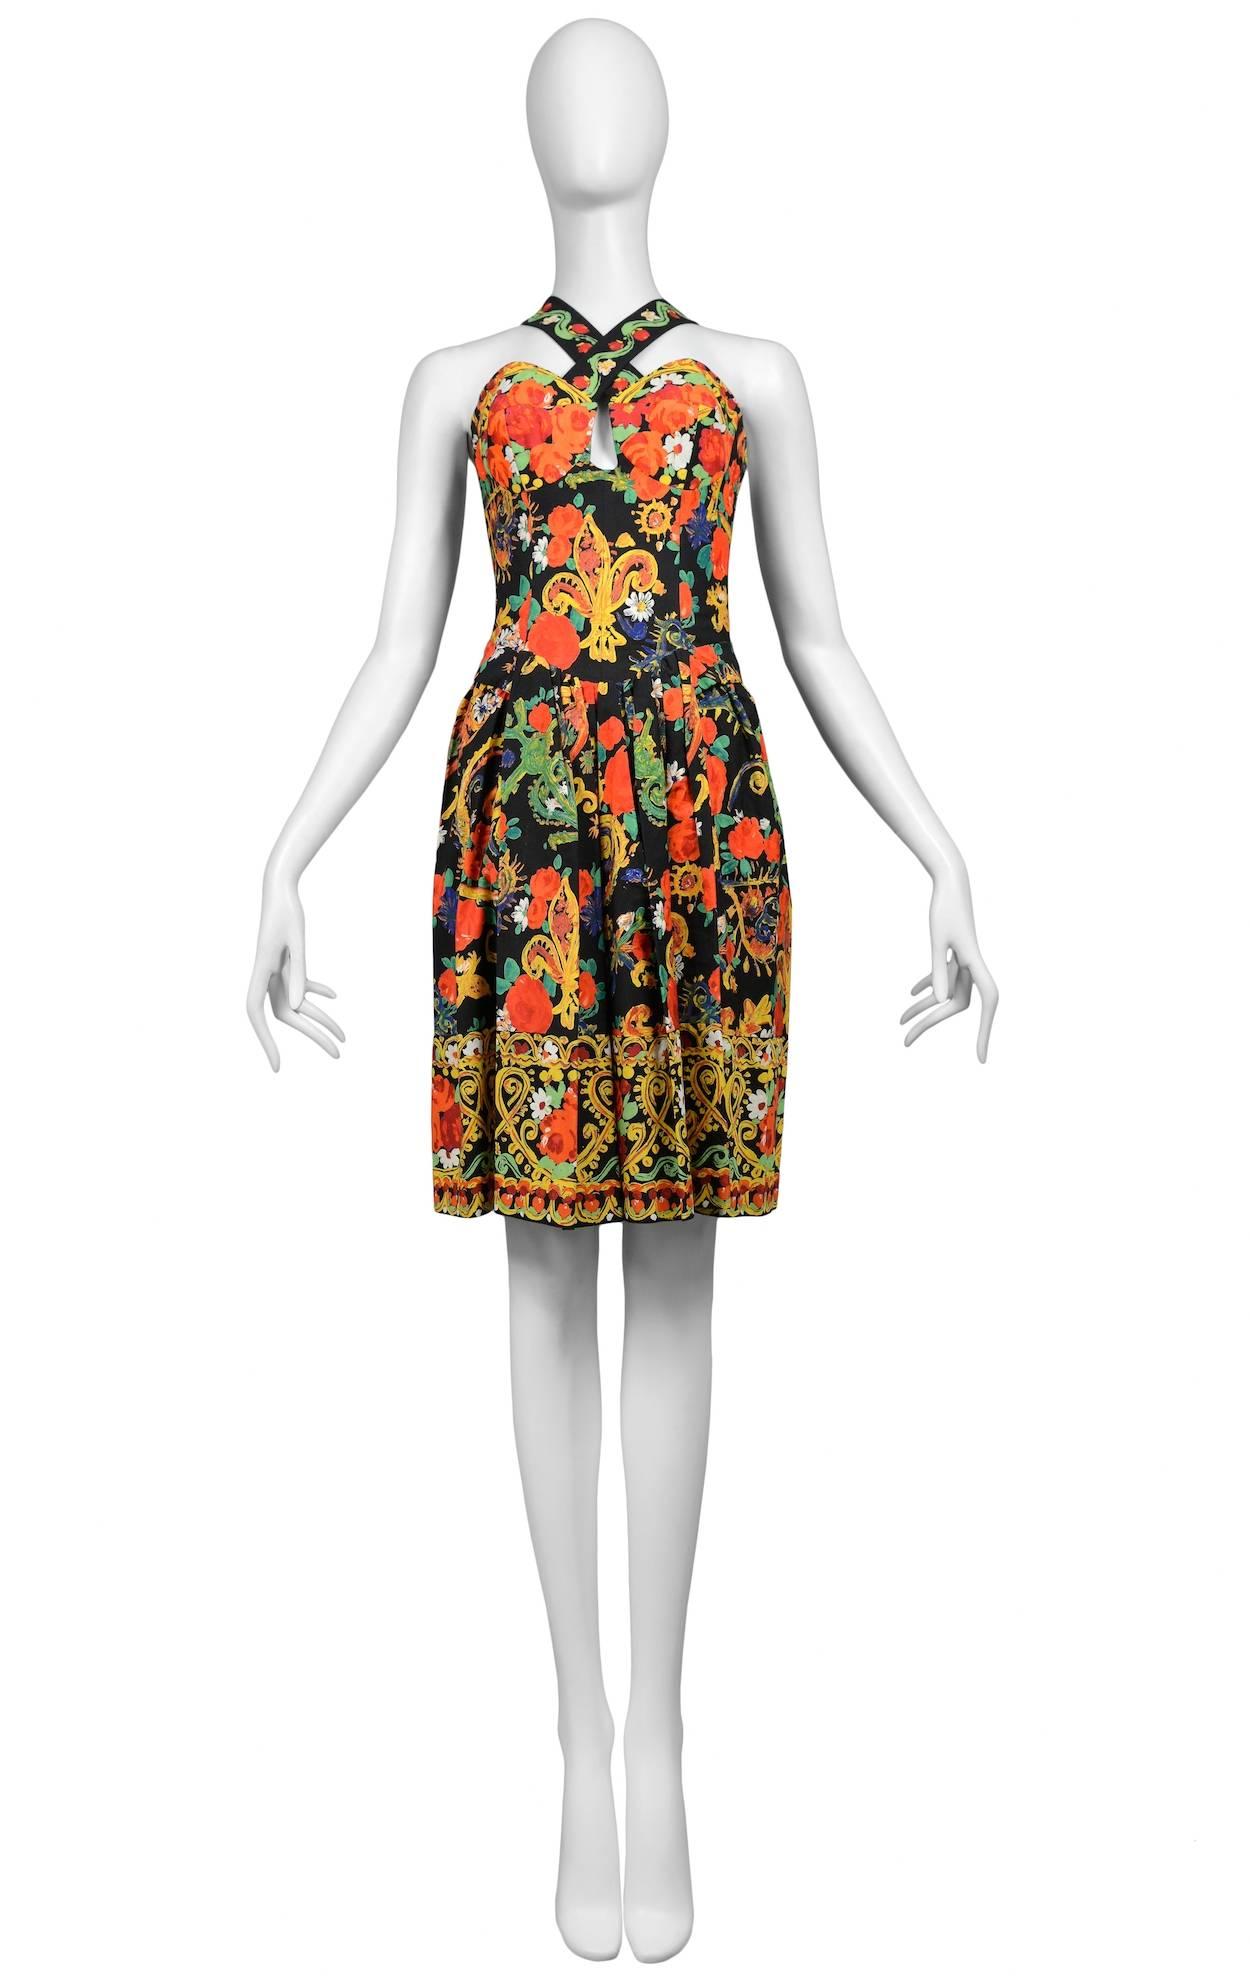 Vintage Christian Lacroix multi color floral bustier dress featuring jewel adorned criss cross straps that overlap in the front and lace up the back through crystal studded grommets.
Please inquire for additional images.